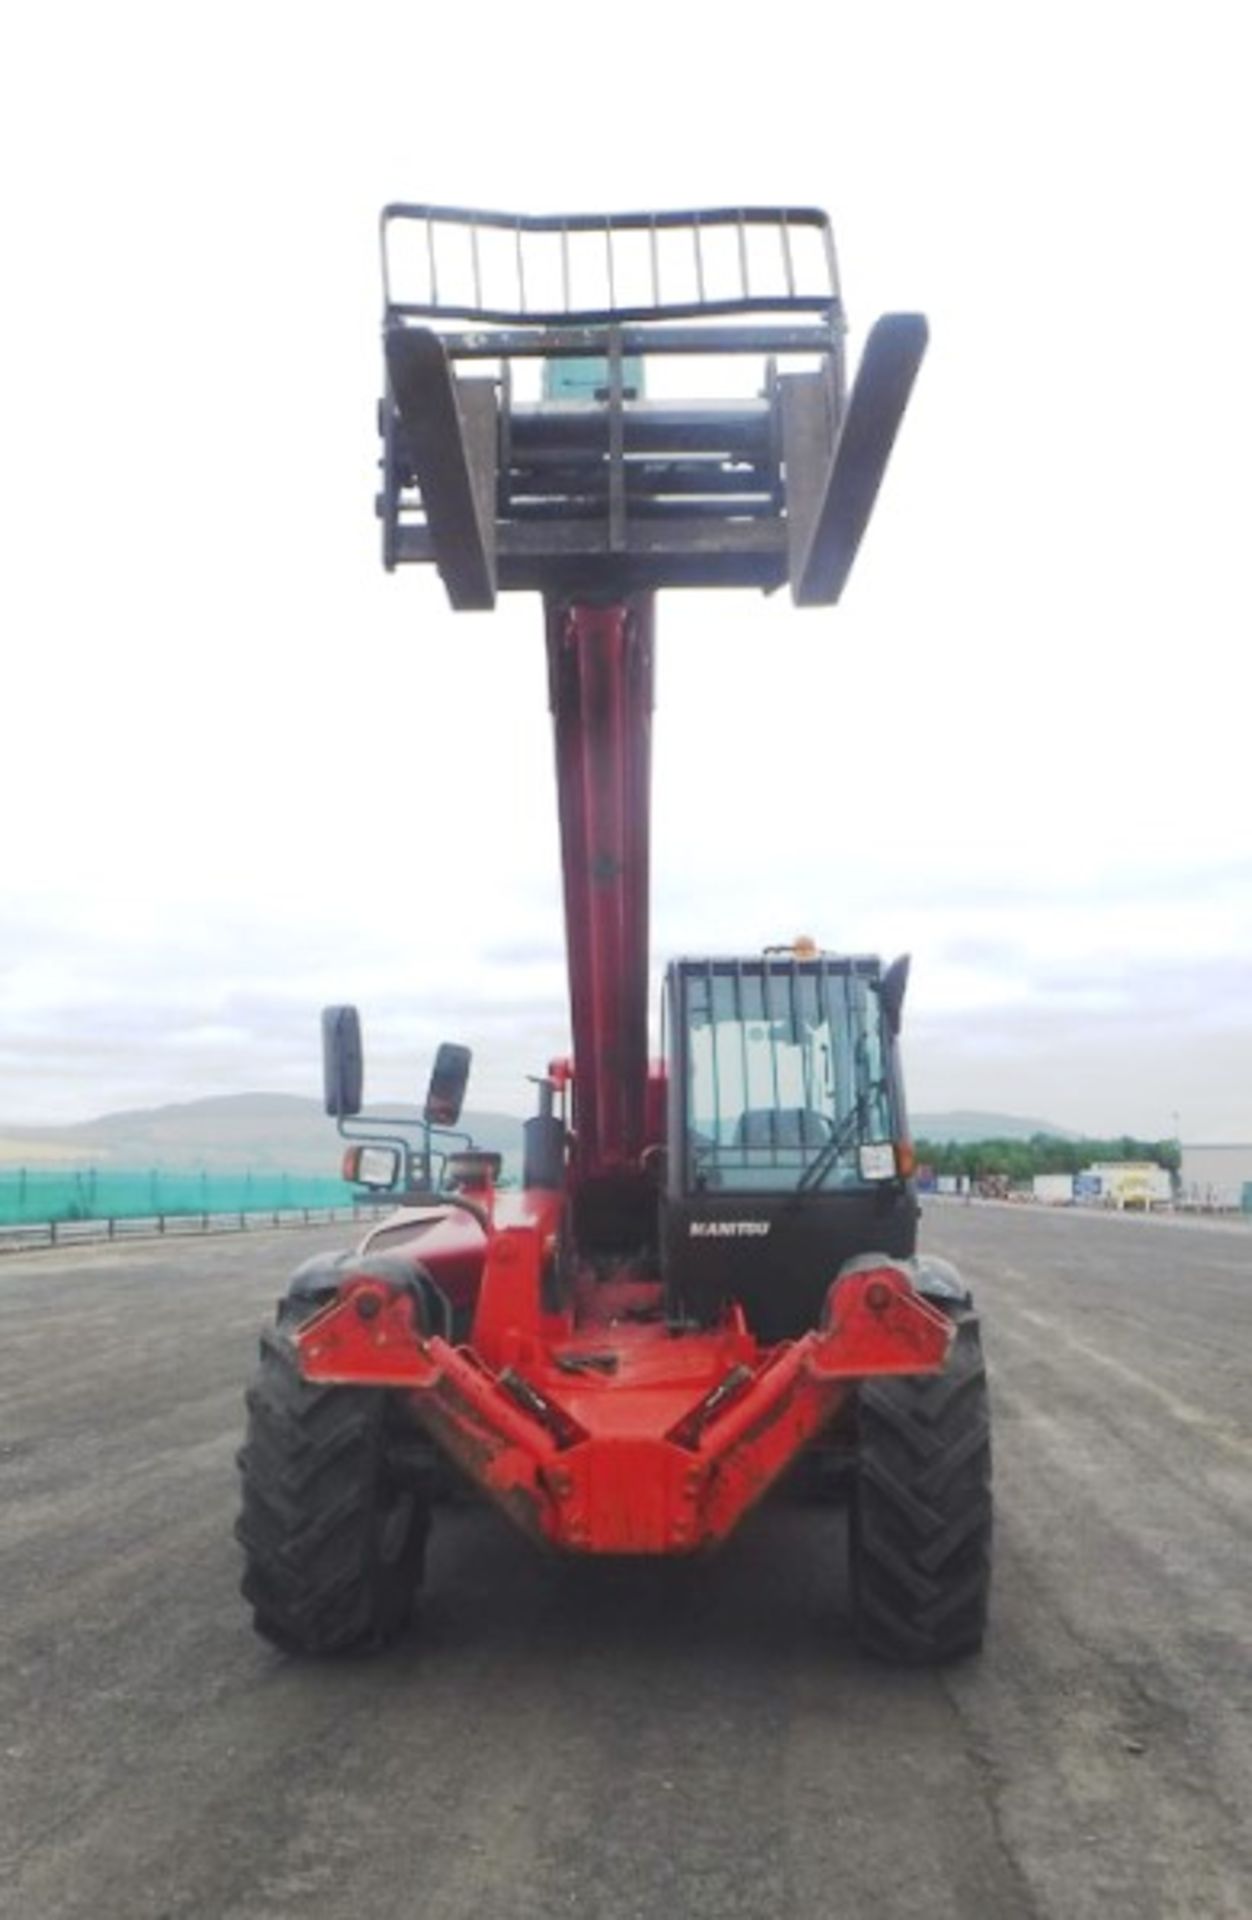 2006 MANITOU 14/35 TELEHANDLER c/w bucket & forks s/n 1230044 Reg no SP06 AXX 2646hrs (not verified) - Image 24 of 31